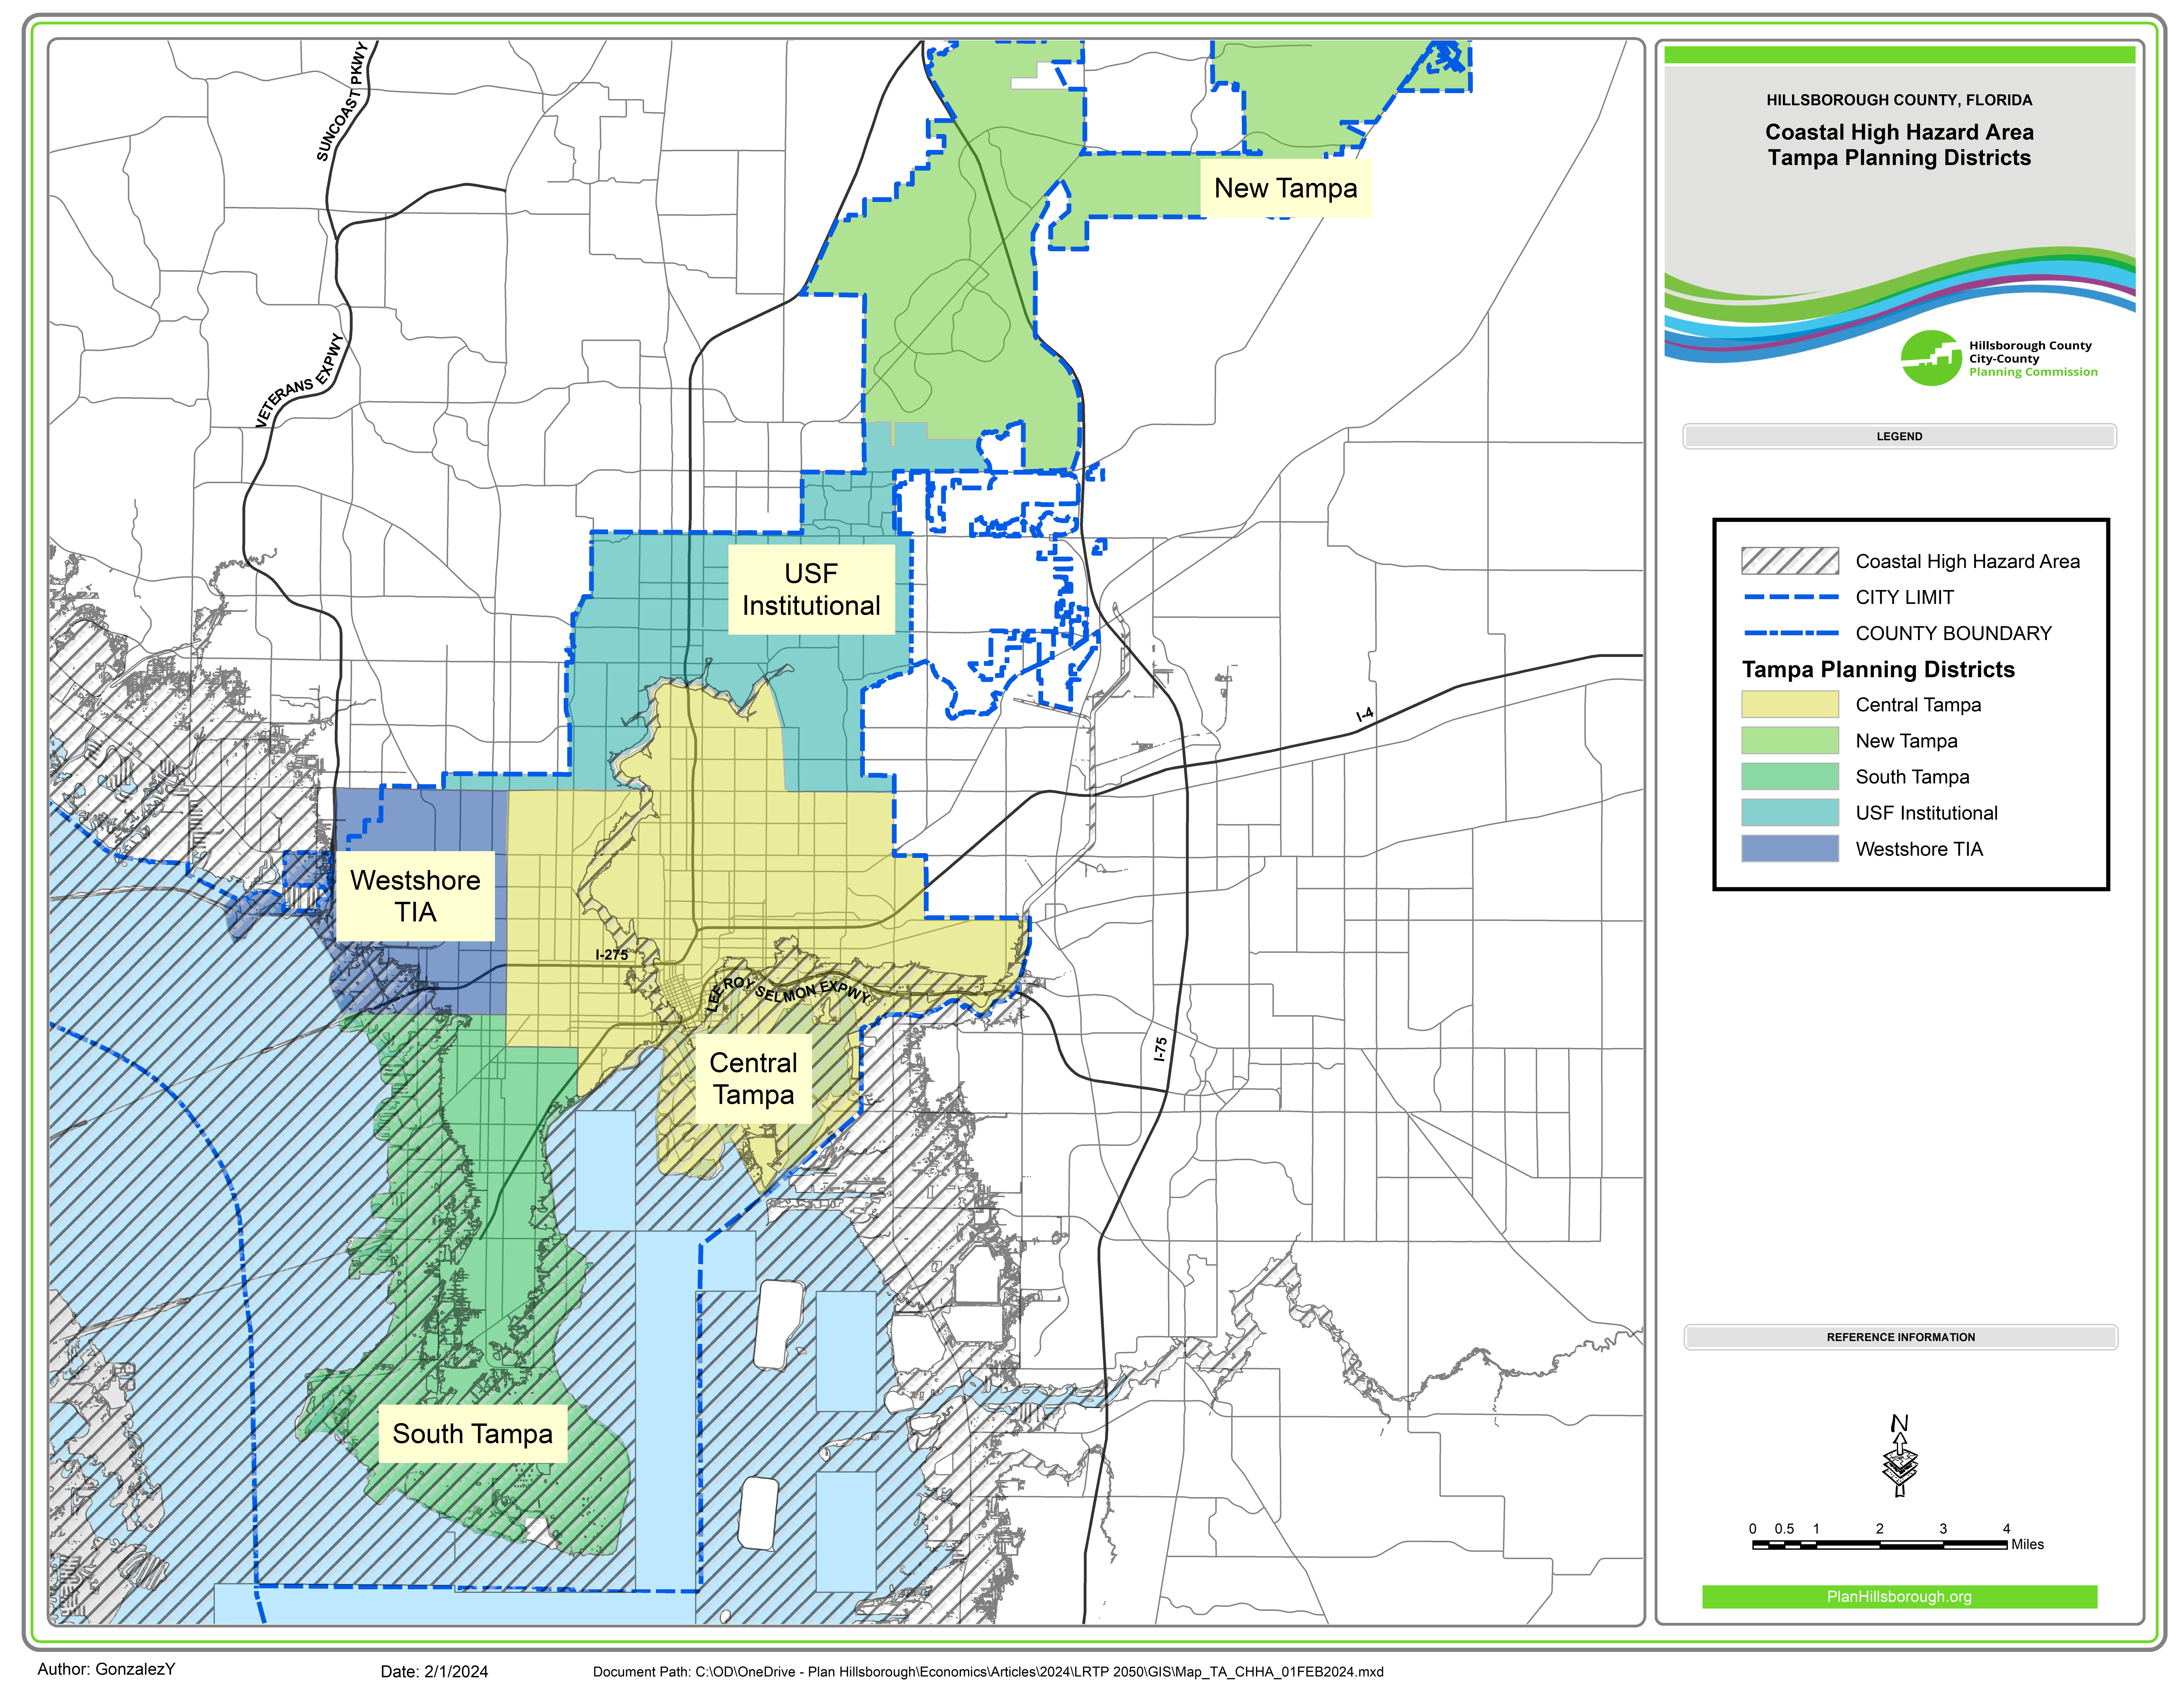 This map shows the Coastal High Hazard Area (CHHA) superimposed over Tampa's planning districts. Four of the 5 Tampa's planning districts are partially within the CHHA.